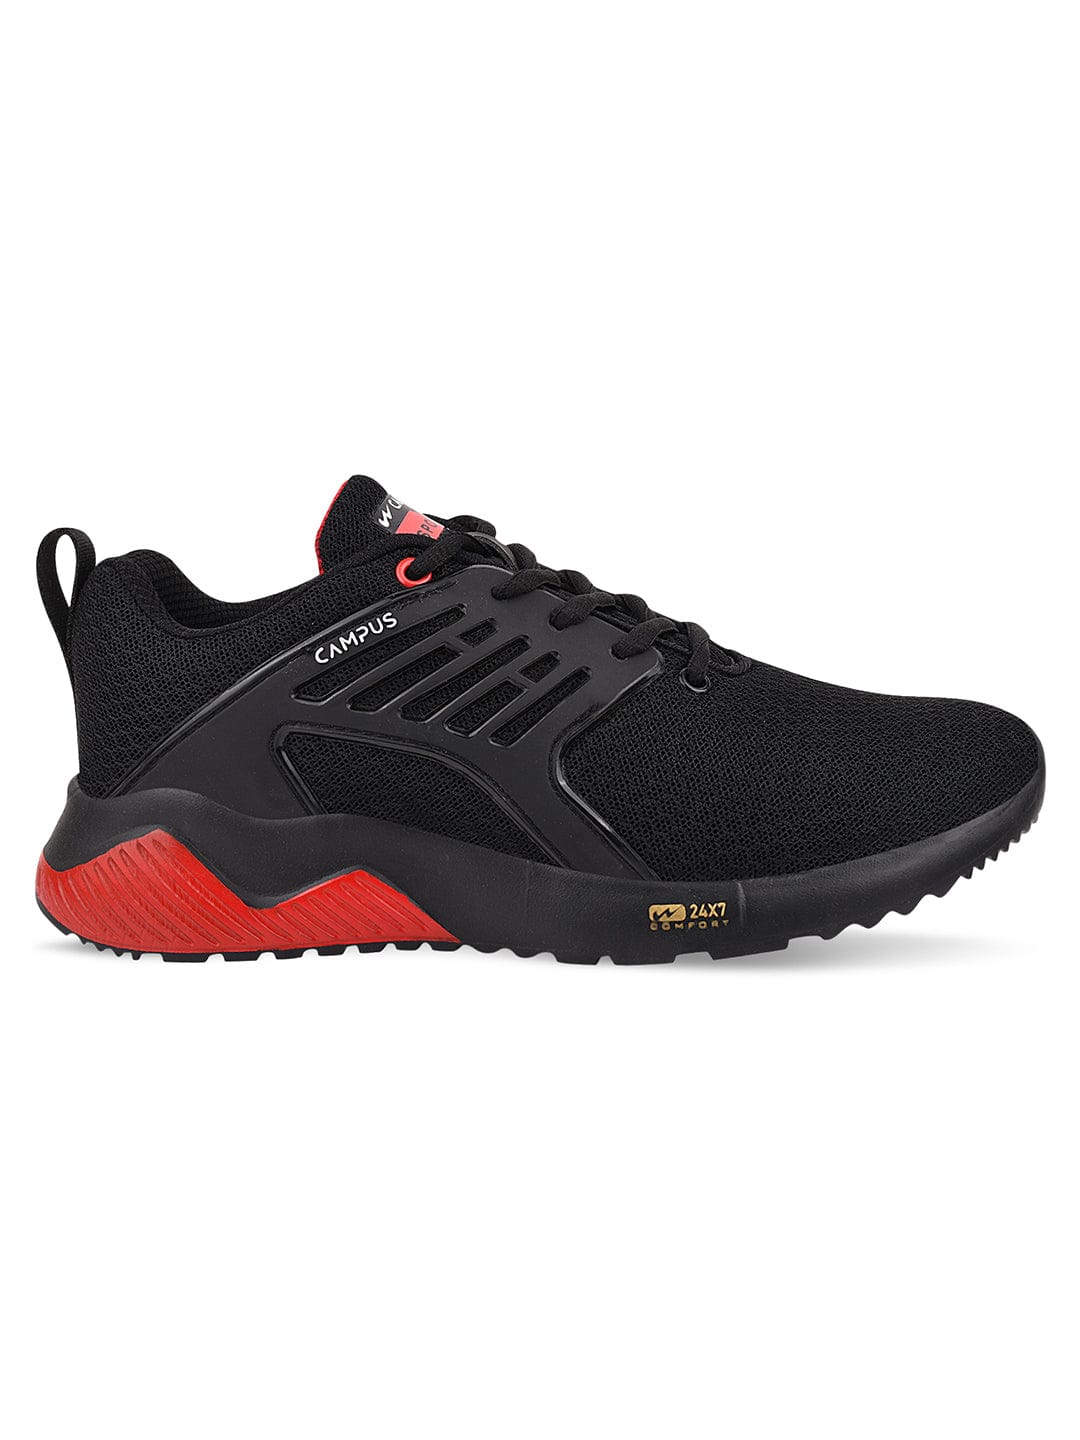 Buy CRYSTA JR Black Child Running Shoes online | Campus Shoes